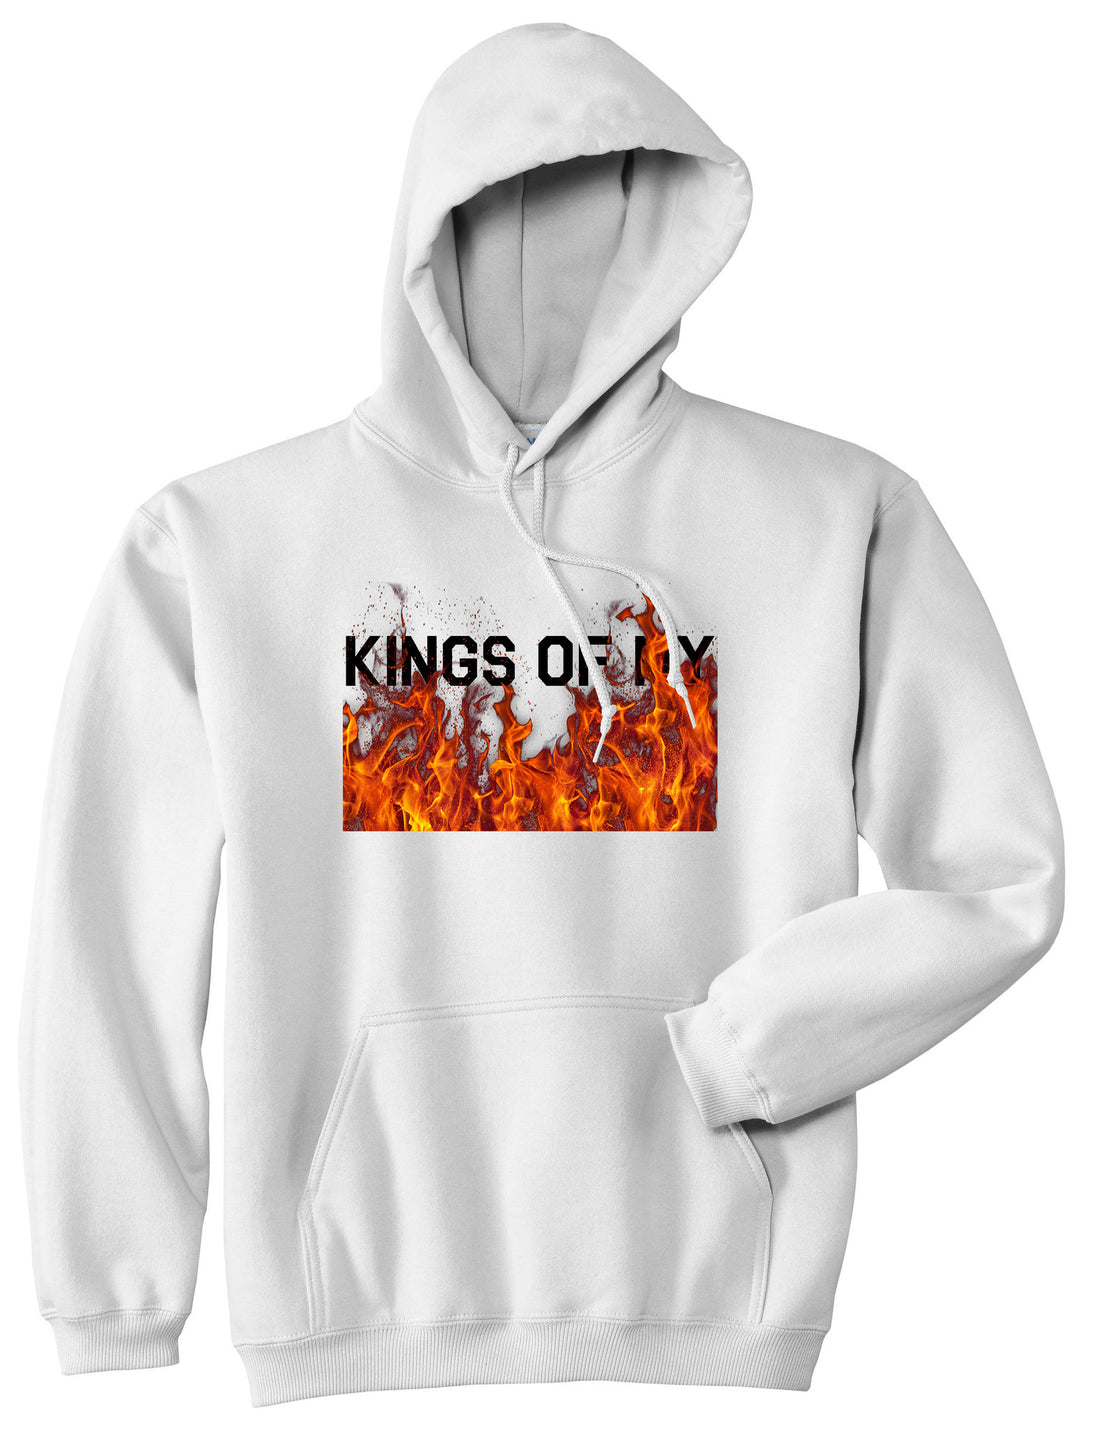 Rising From The Flames Pullover Hoodie in White